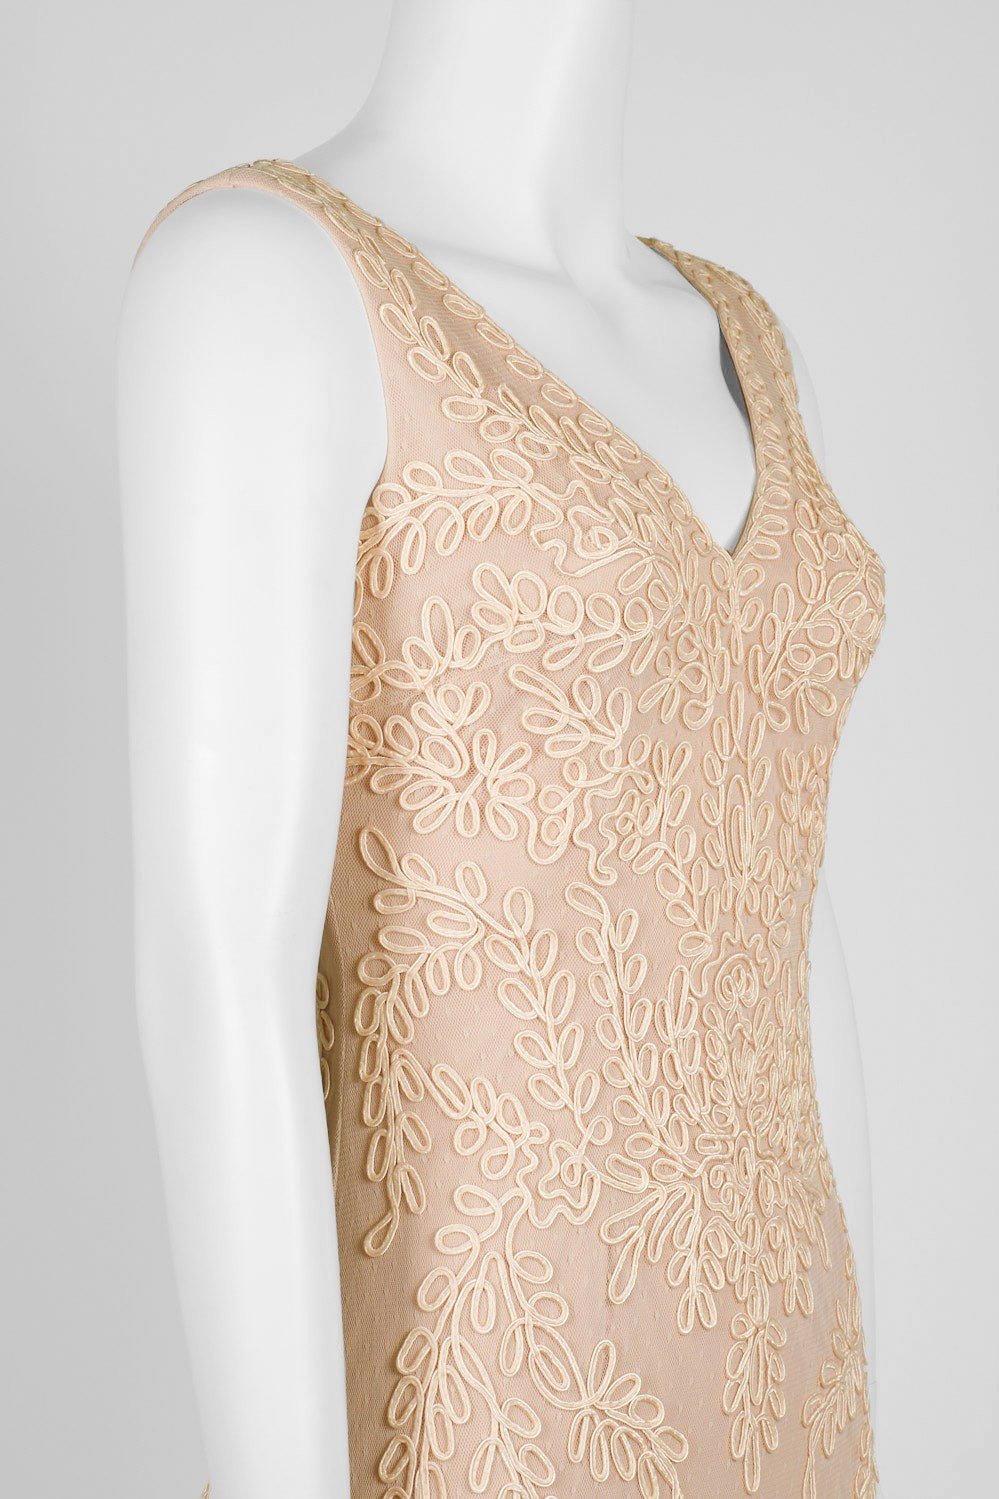 Cachet - 57058K Embroidered Soutache Godet Accented Dress In Neutral